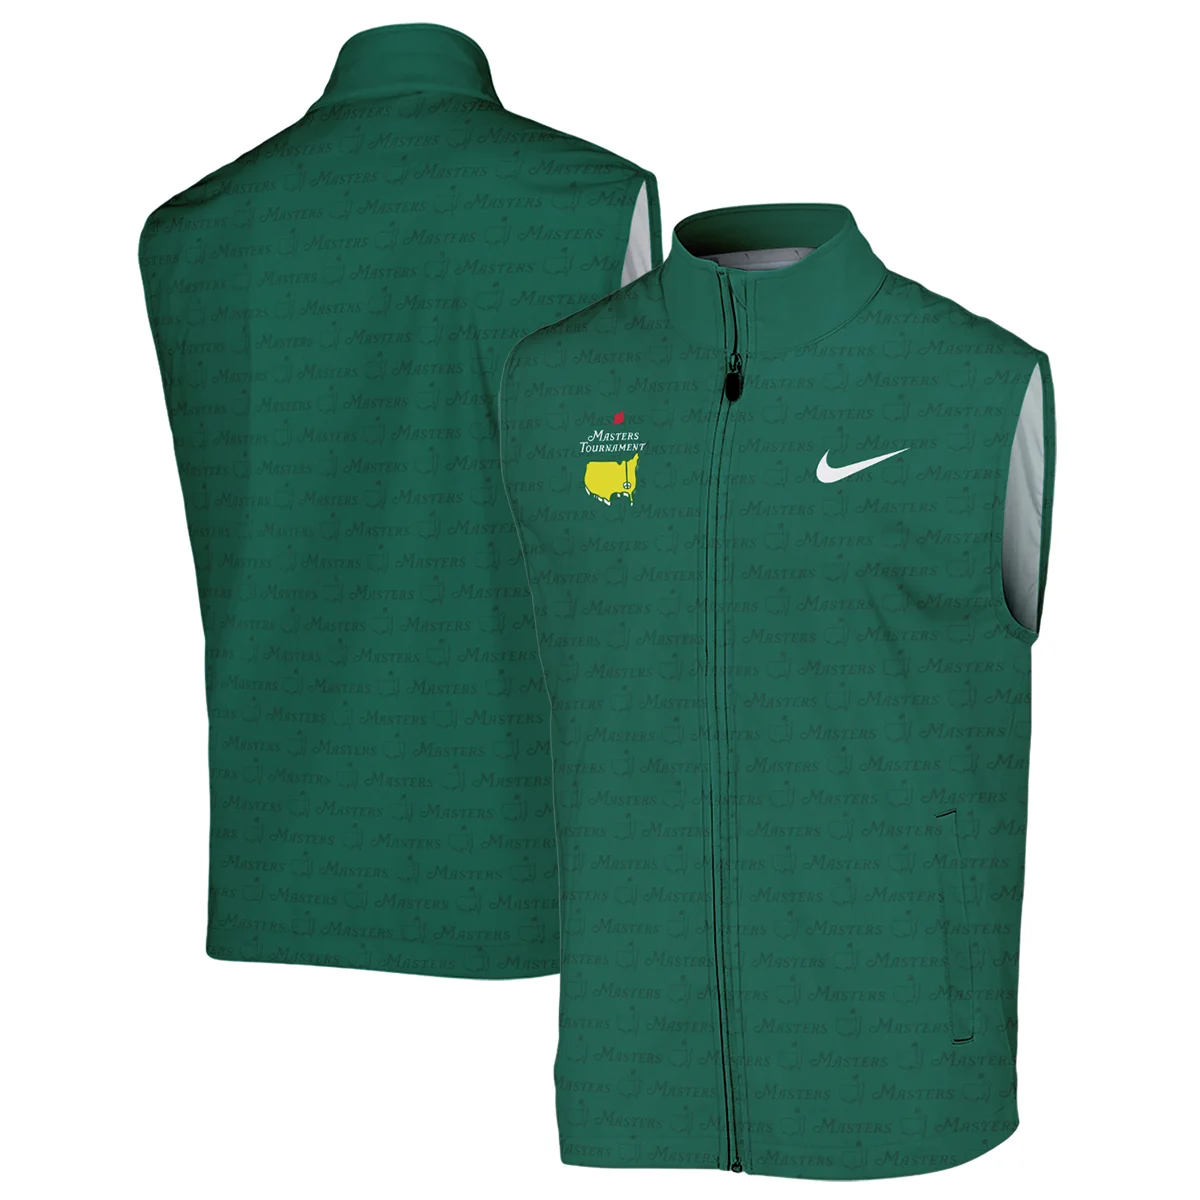 Golf Pattern Cup White Mix Green Masters Tournament Nike Style Classic, Short Sleeve Polo Shirts Quarter-Zip Casual Slim Fit Mock Neck Basic